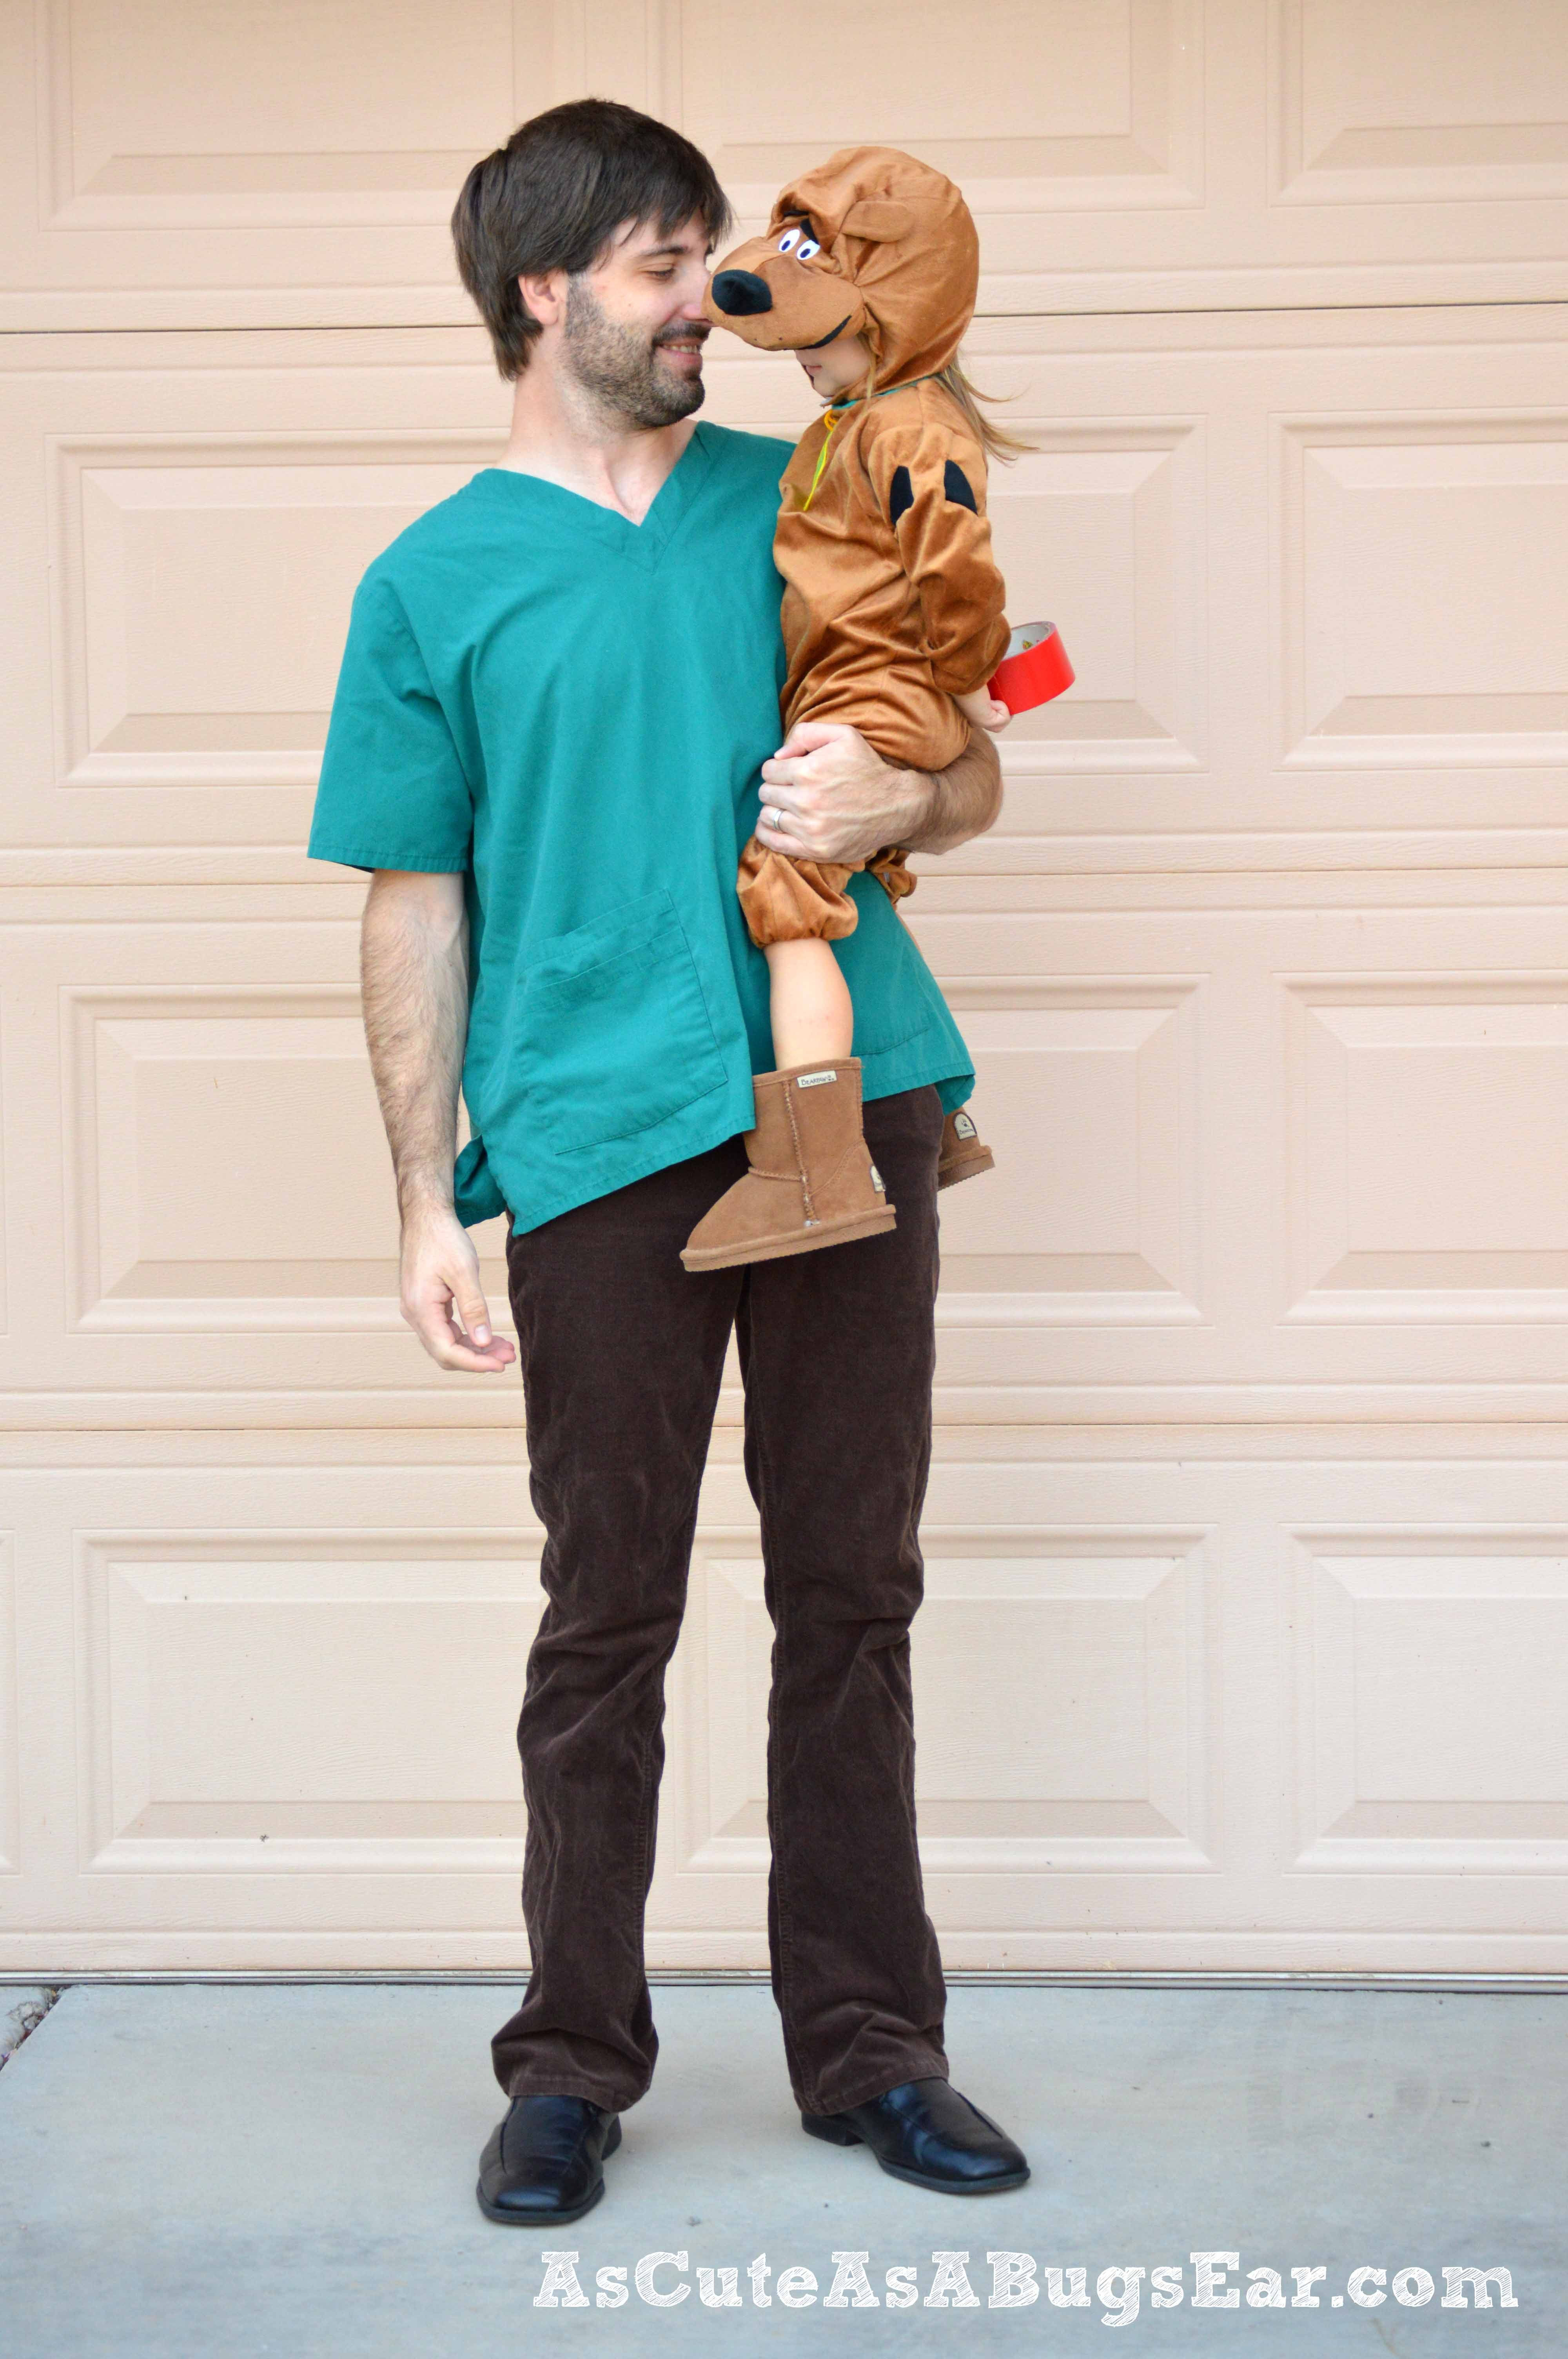 Best ideas about DIY Scooby Doo Costume
. Save or Pin DIY Shaggy & Scooby Doo Costume Now.